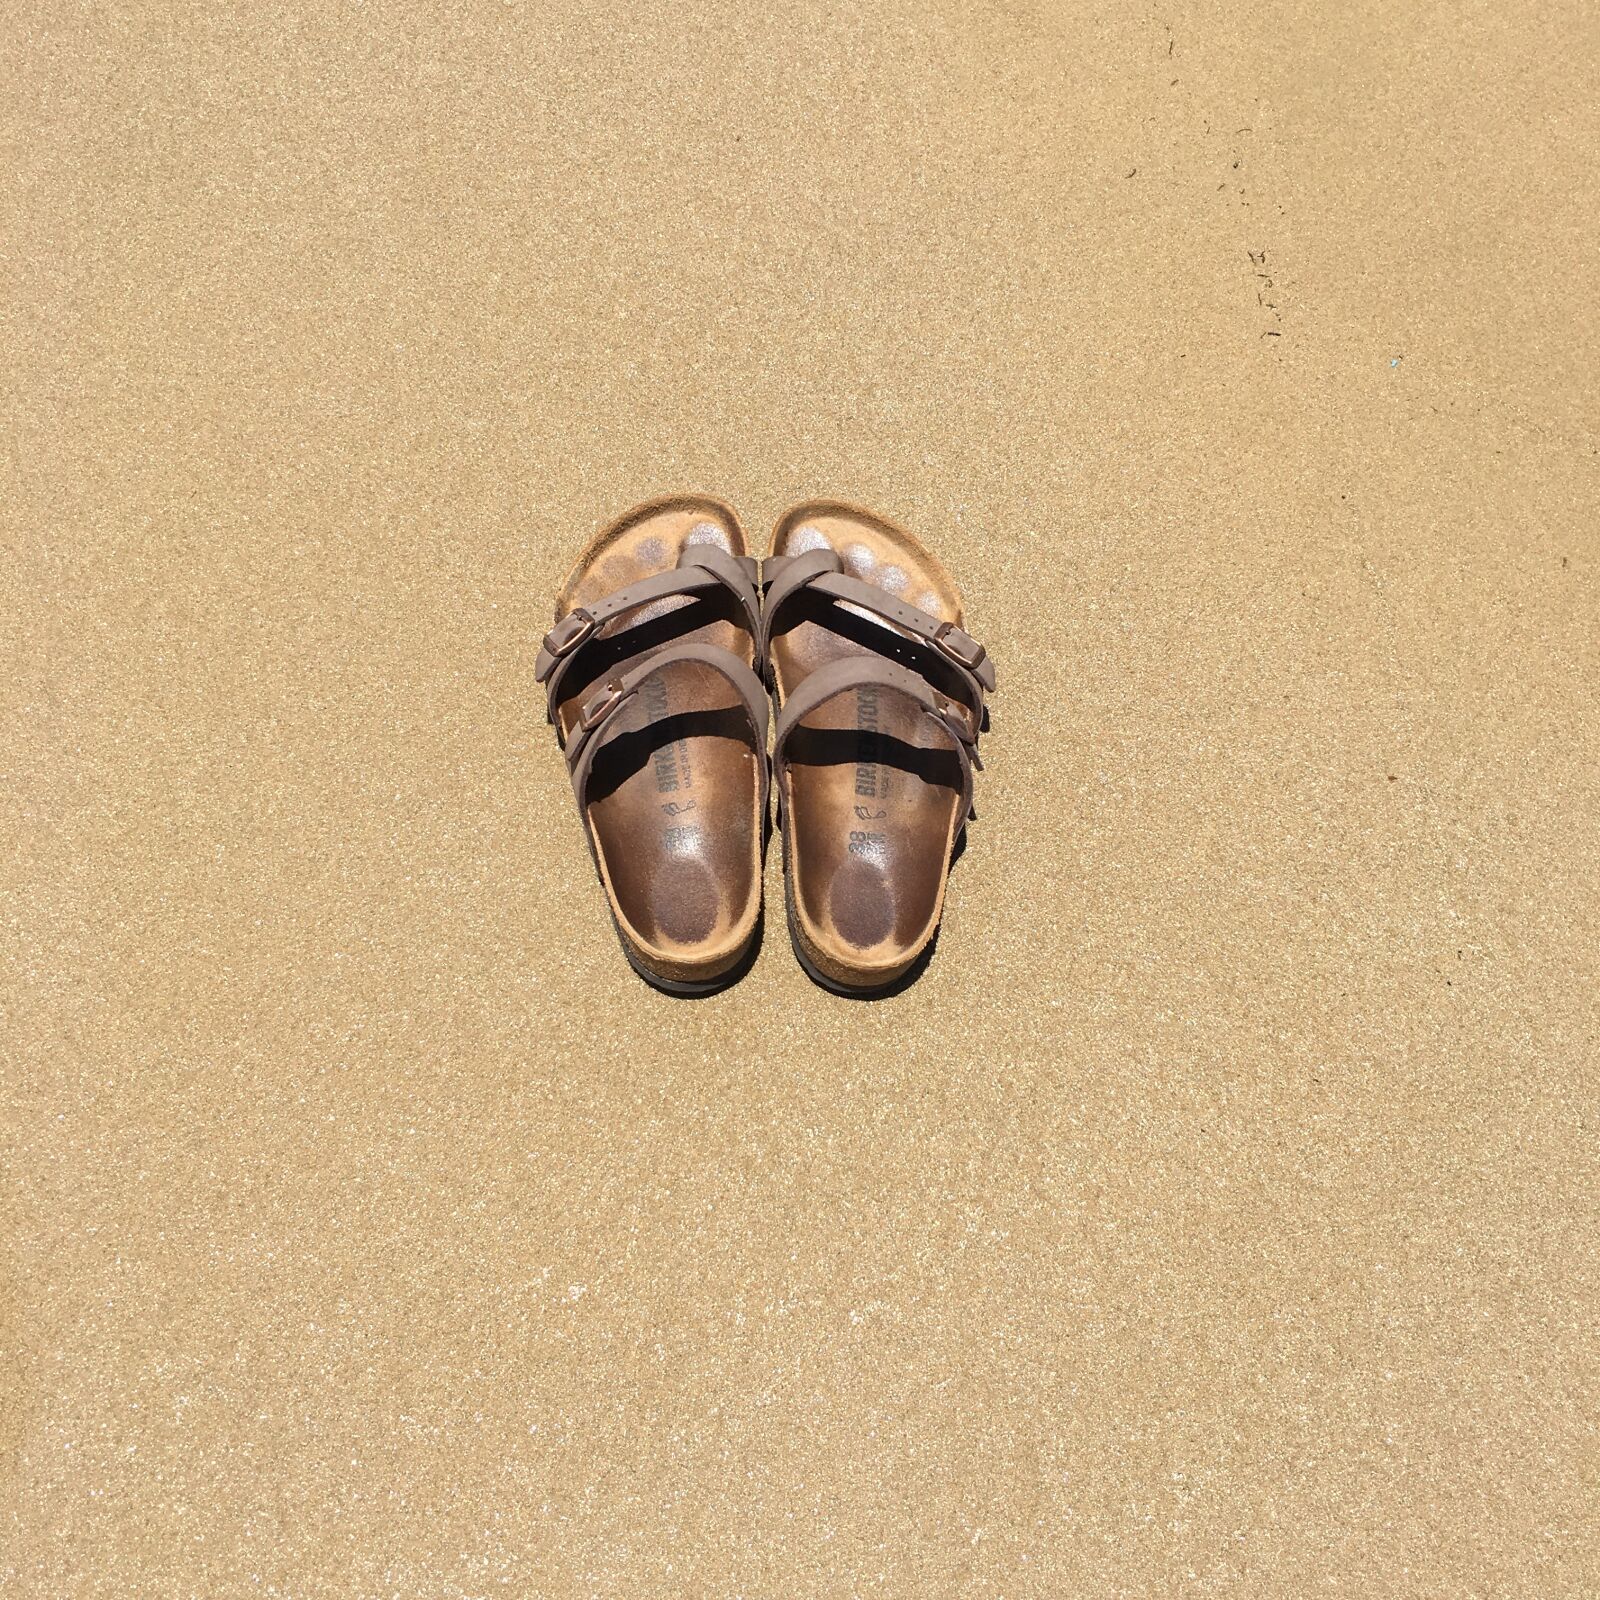 Apple iPhone 6s + iPhone 6s back camera 4.15mm f/2.2 sample photo. Shoes, sand, beachwalks photography